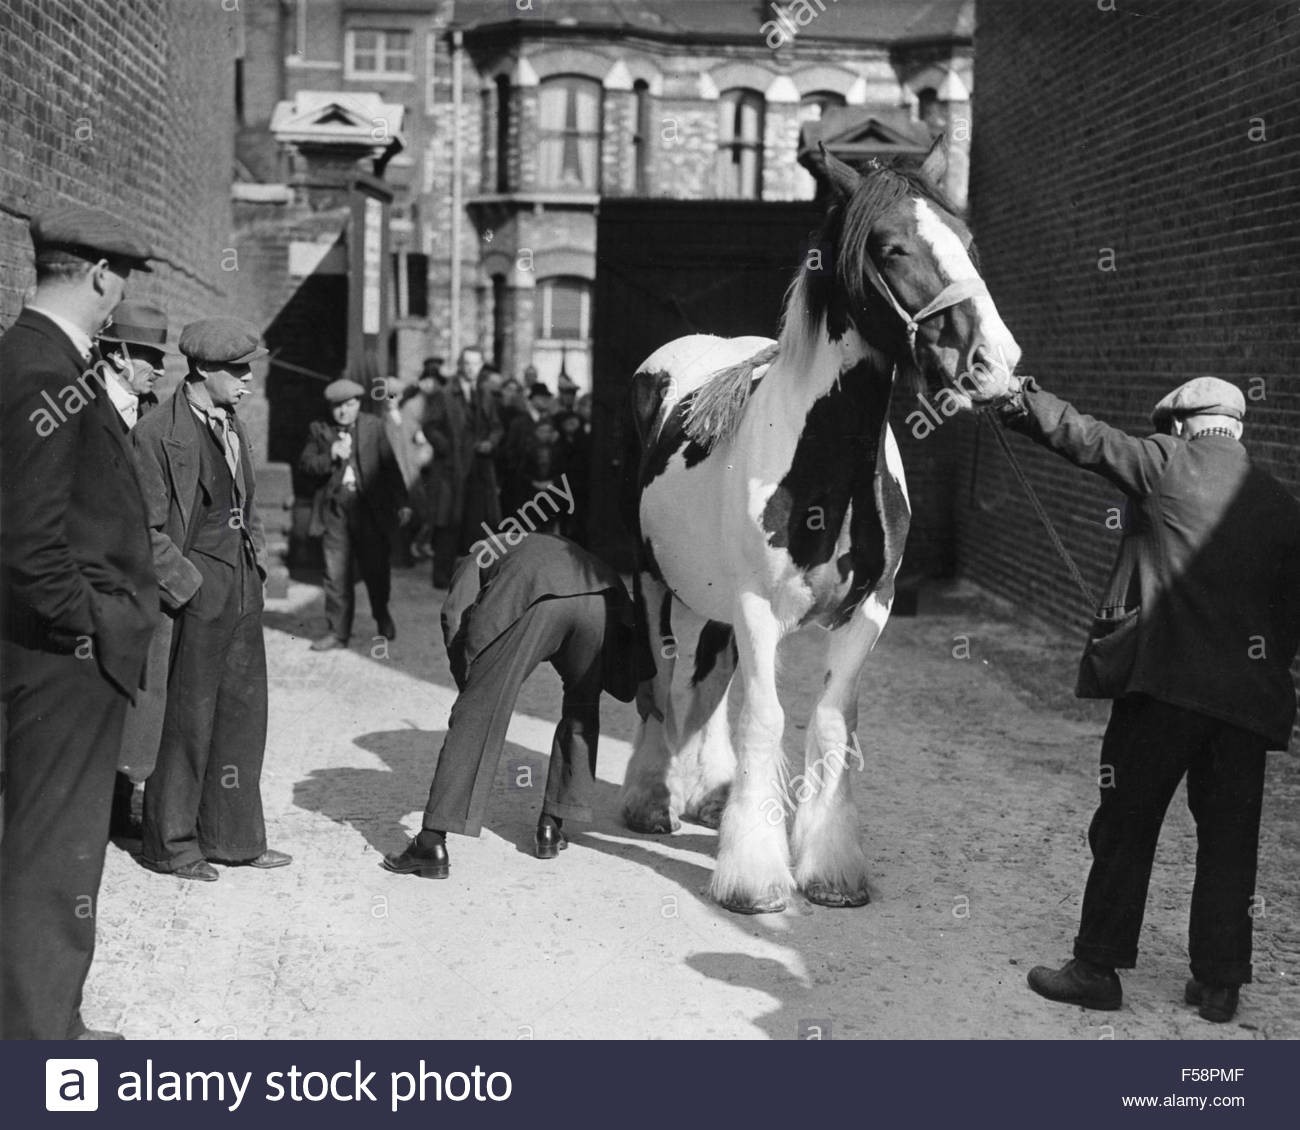 Elephant and Castle, Horse Auction about 1947.jpg